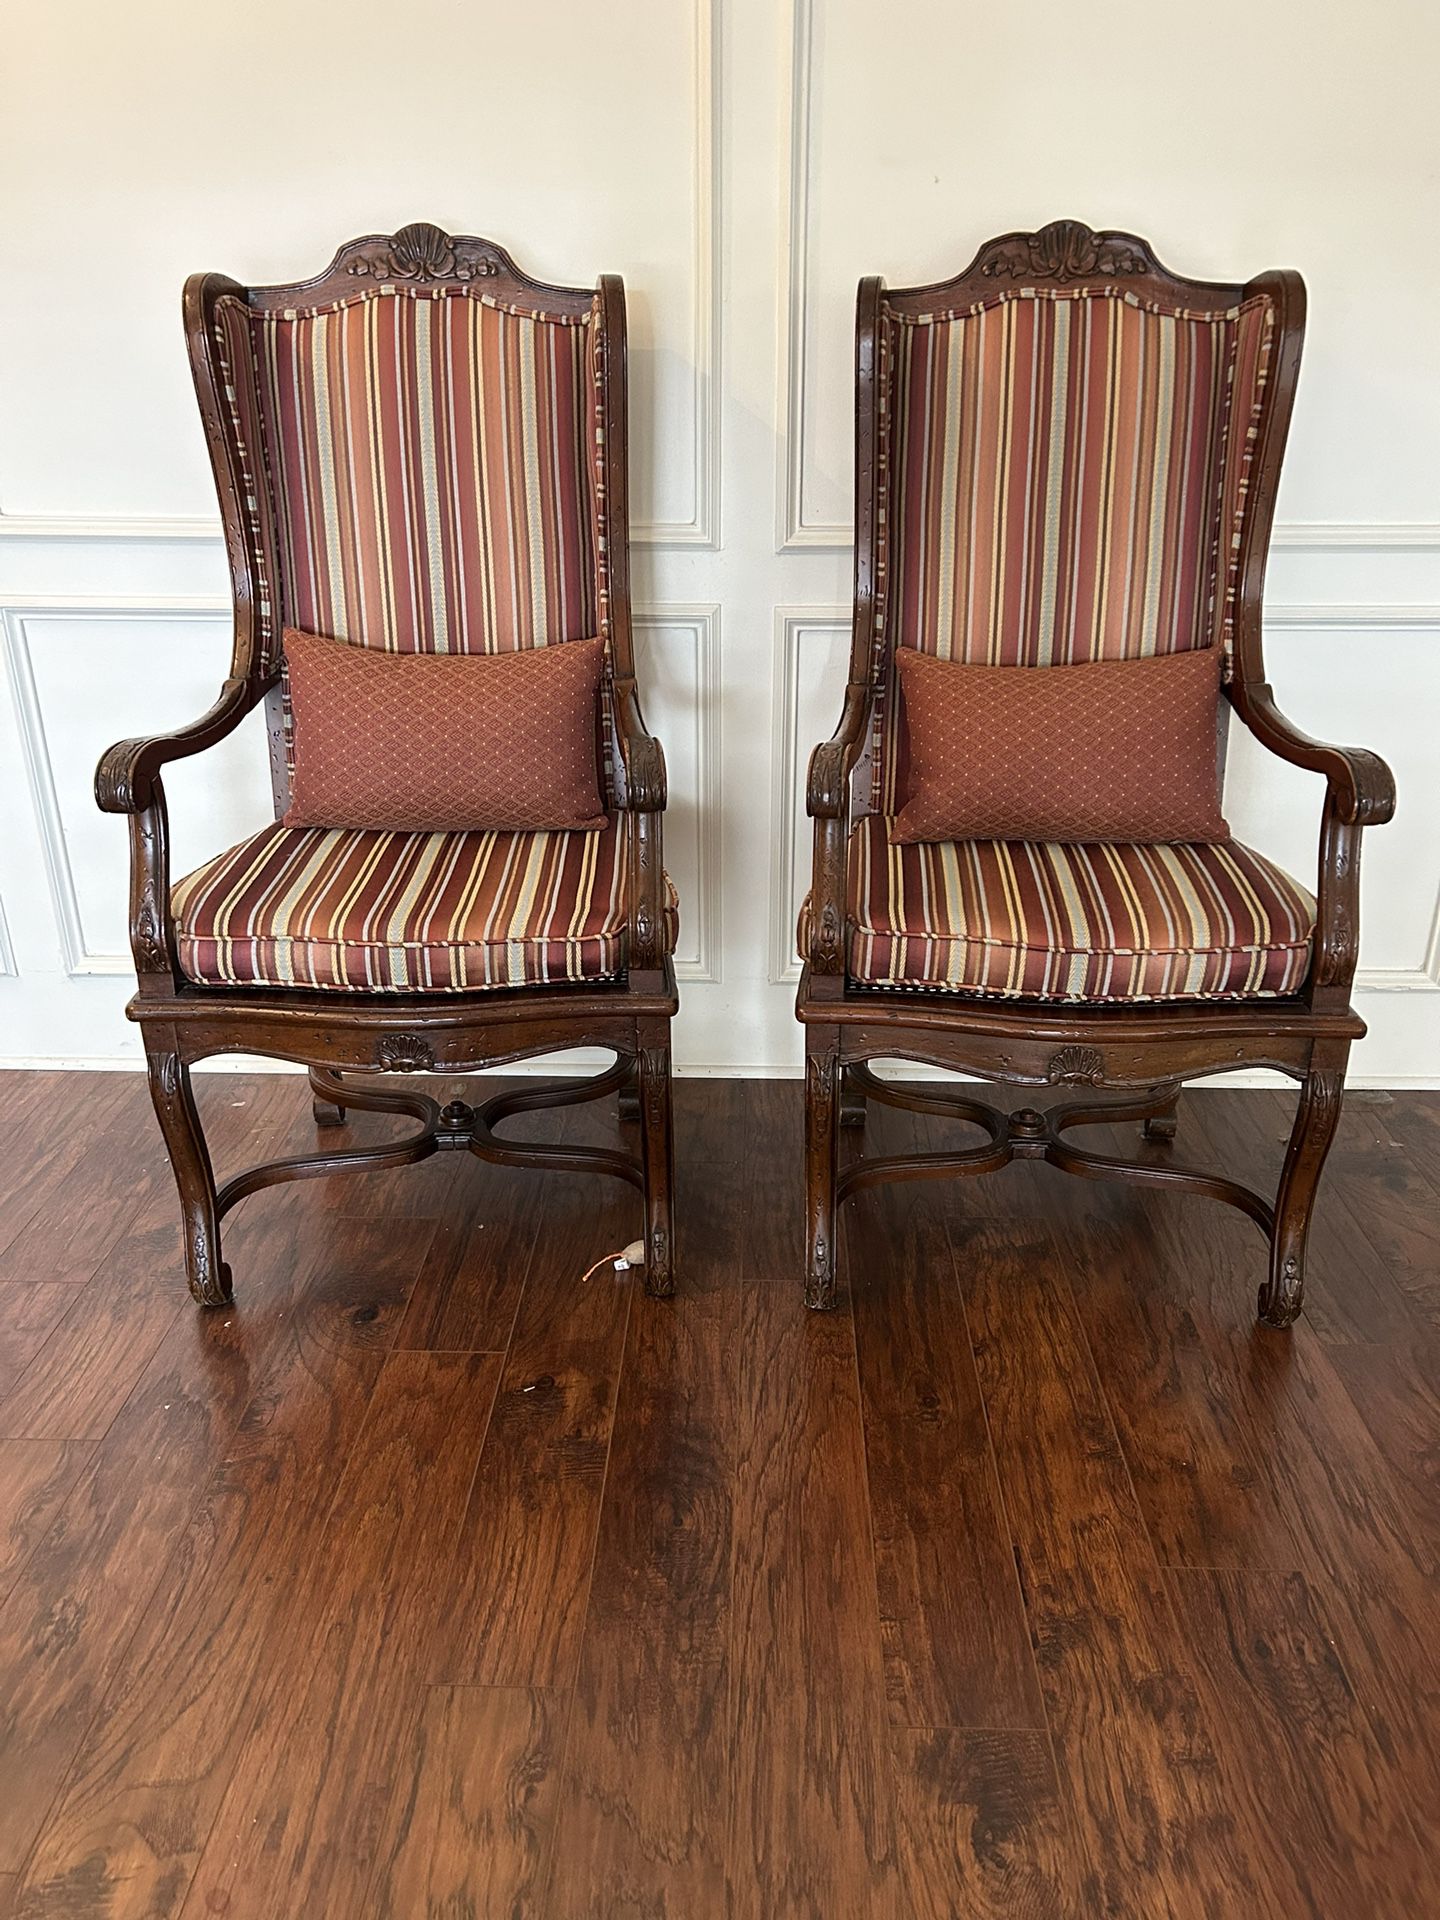 Two Wooden Chairs Reupholstered Recently 